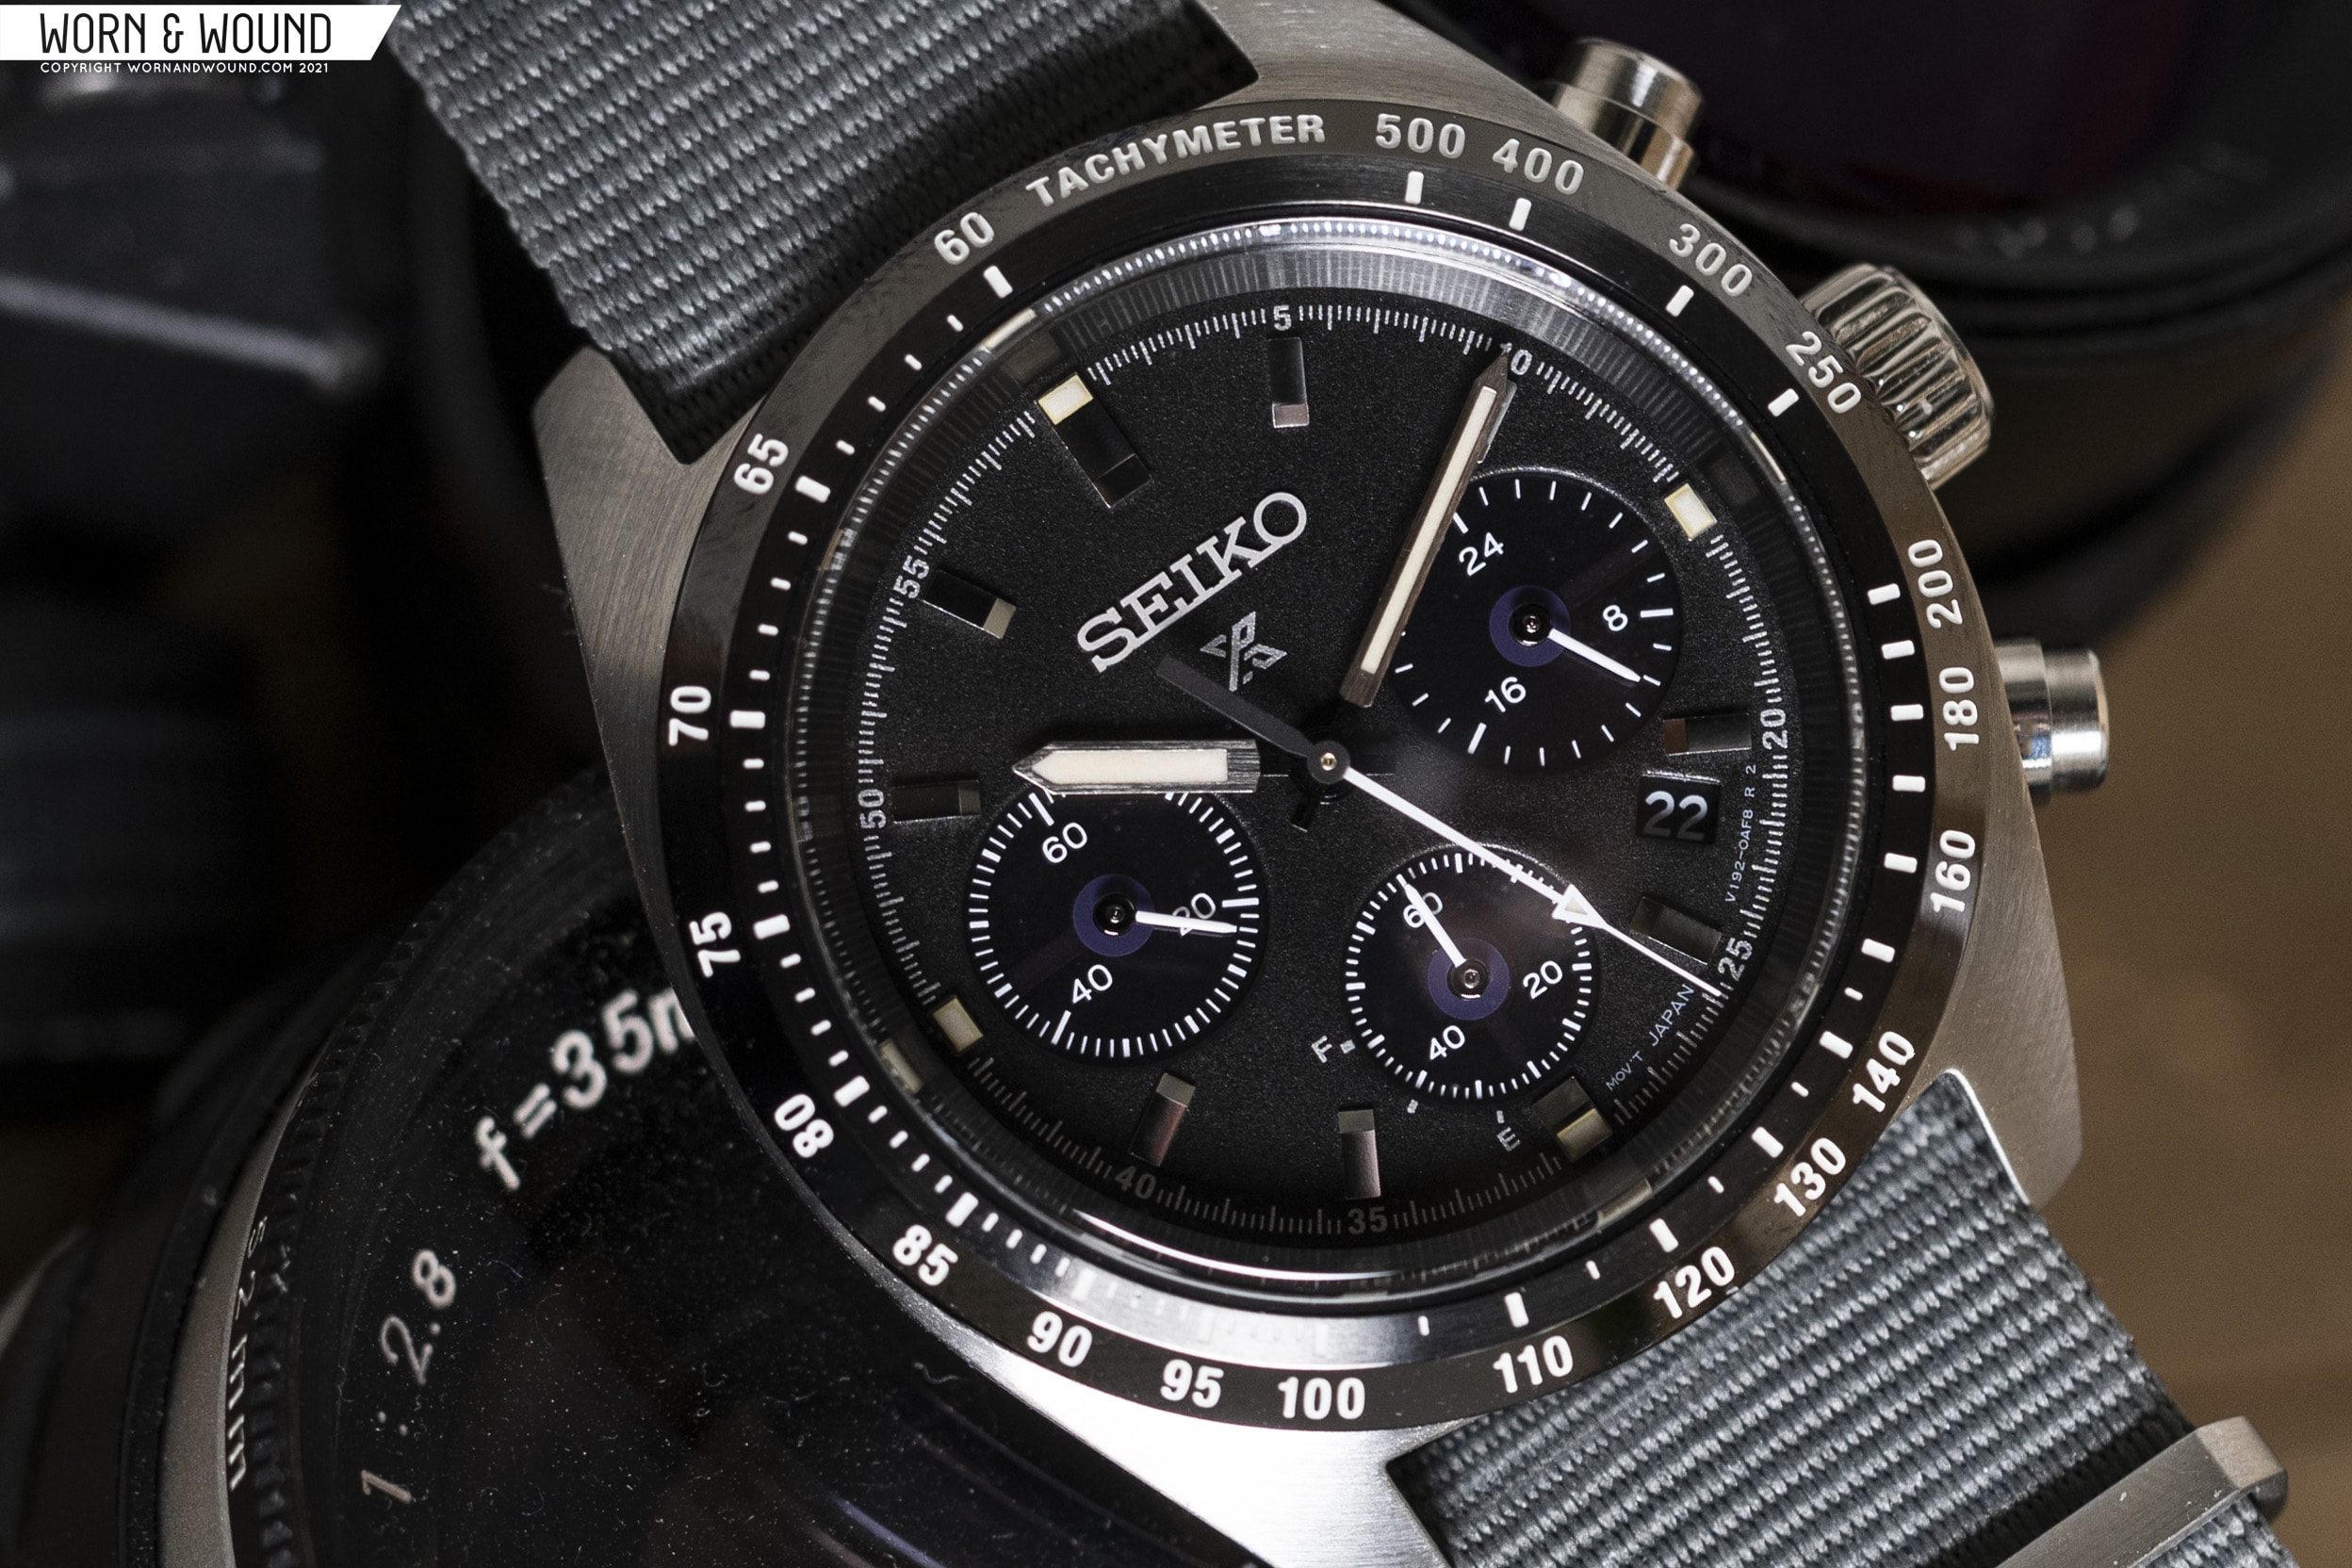 The Seiko SSC819 Is The Sleeper Chronograph Of The Year - Worn & Wound